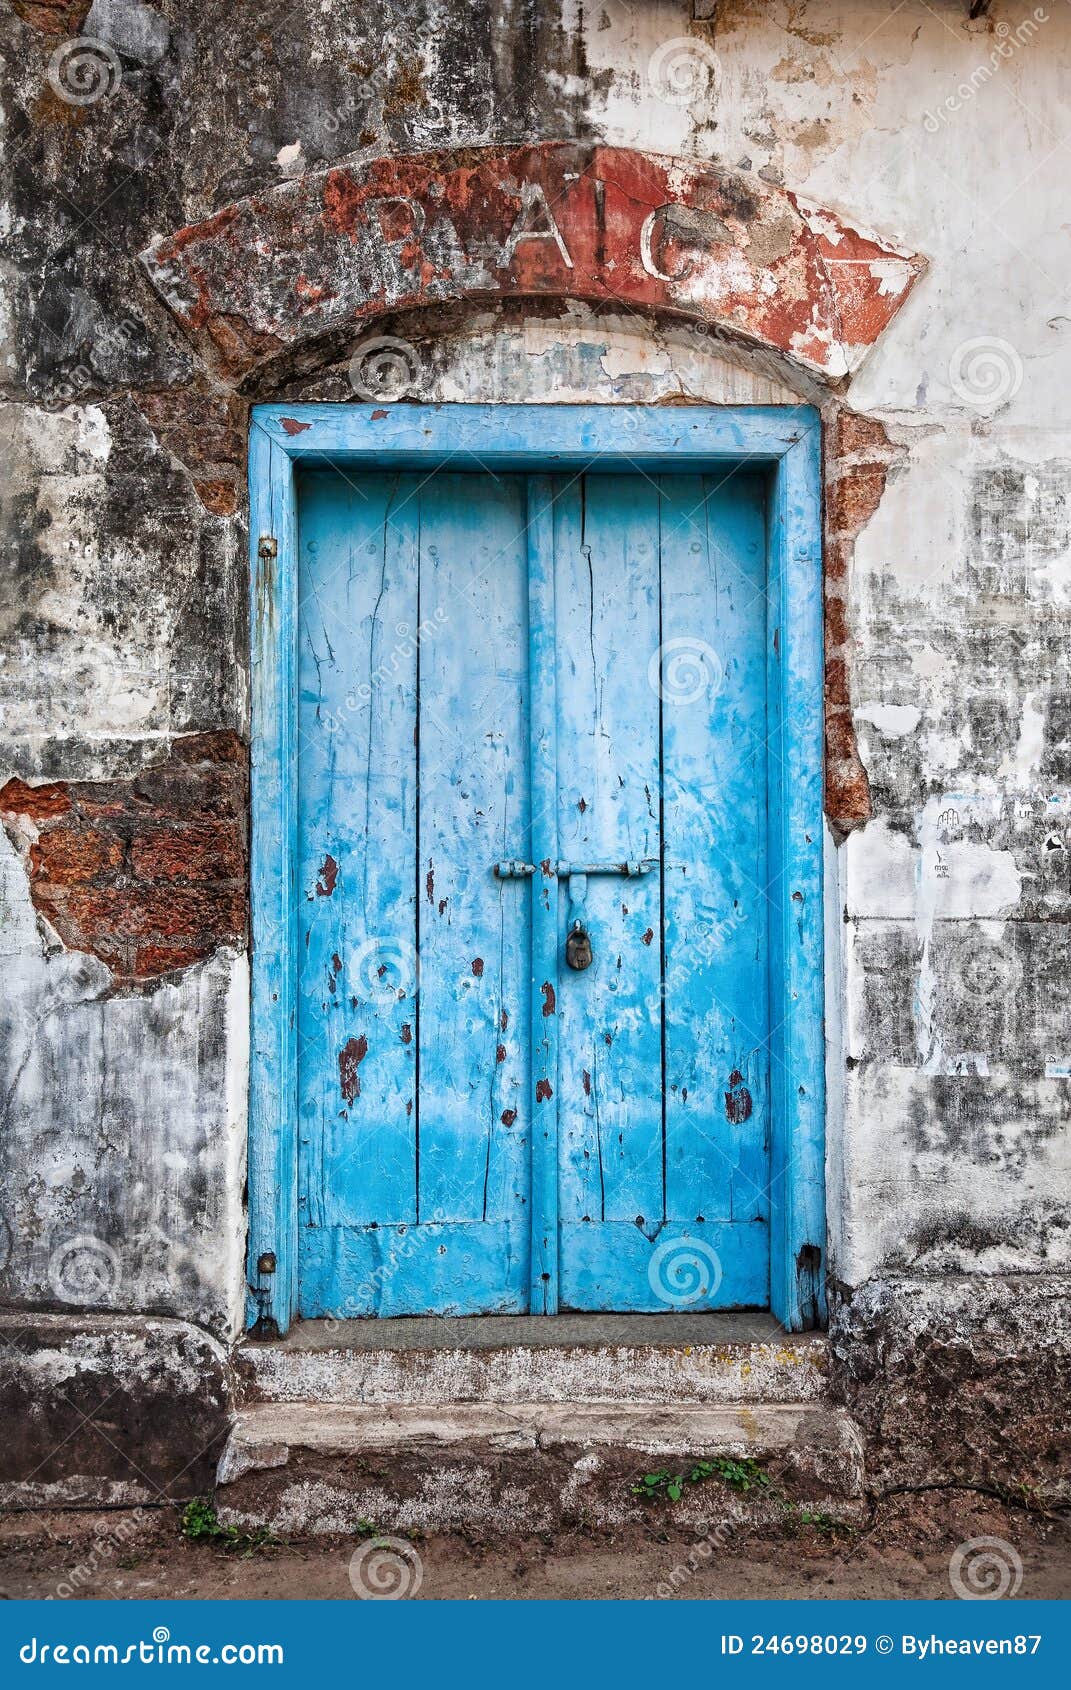 Vintage Blue Door Royalty Free Stock Images - Image: 24698029